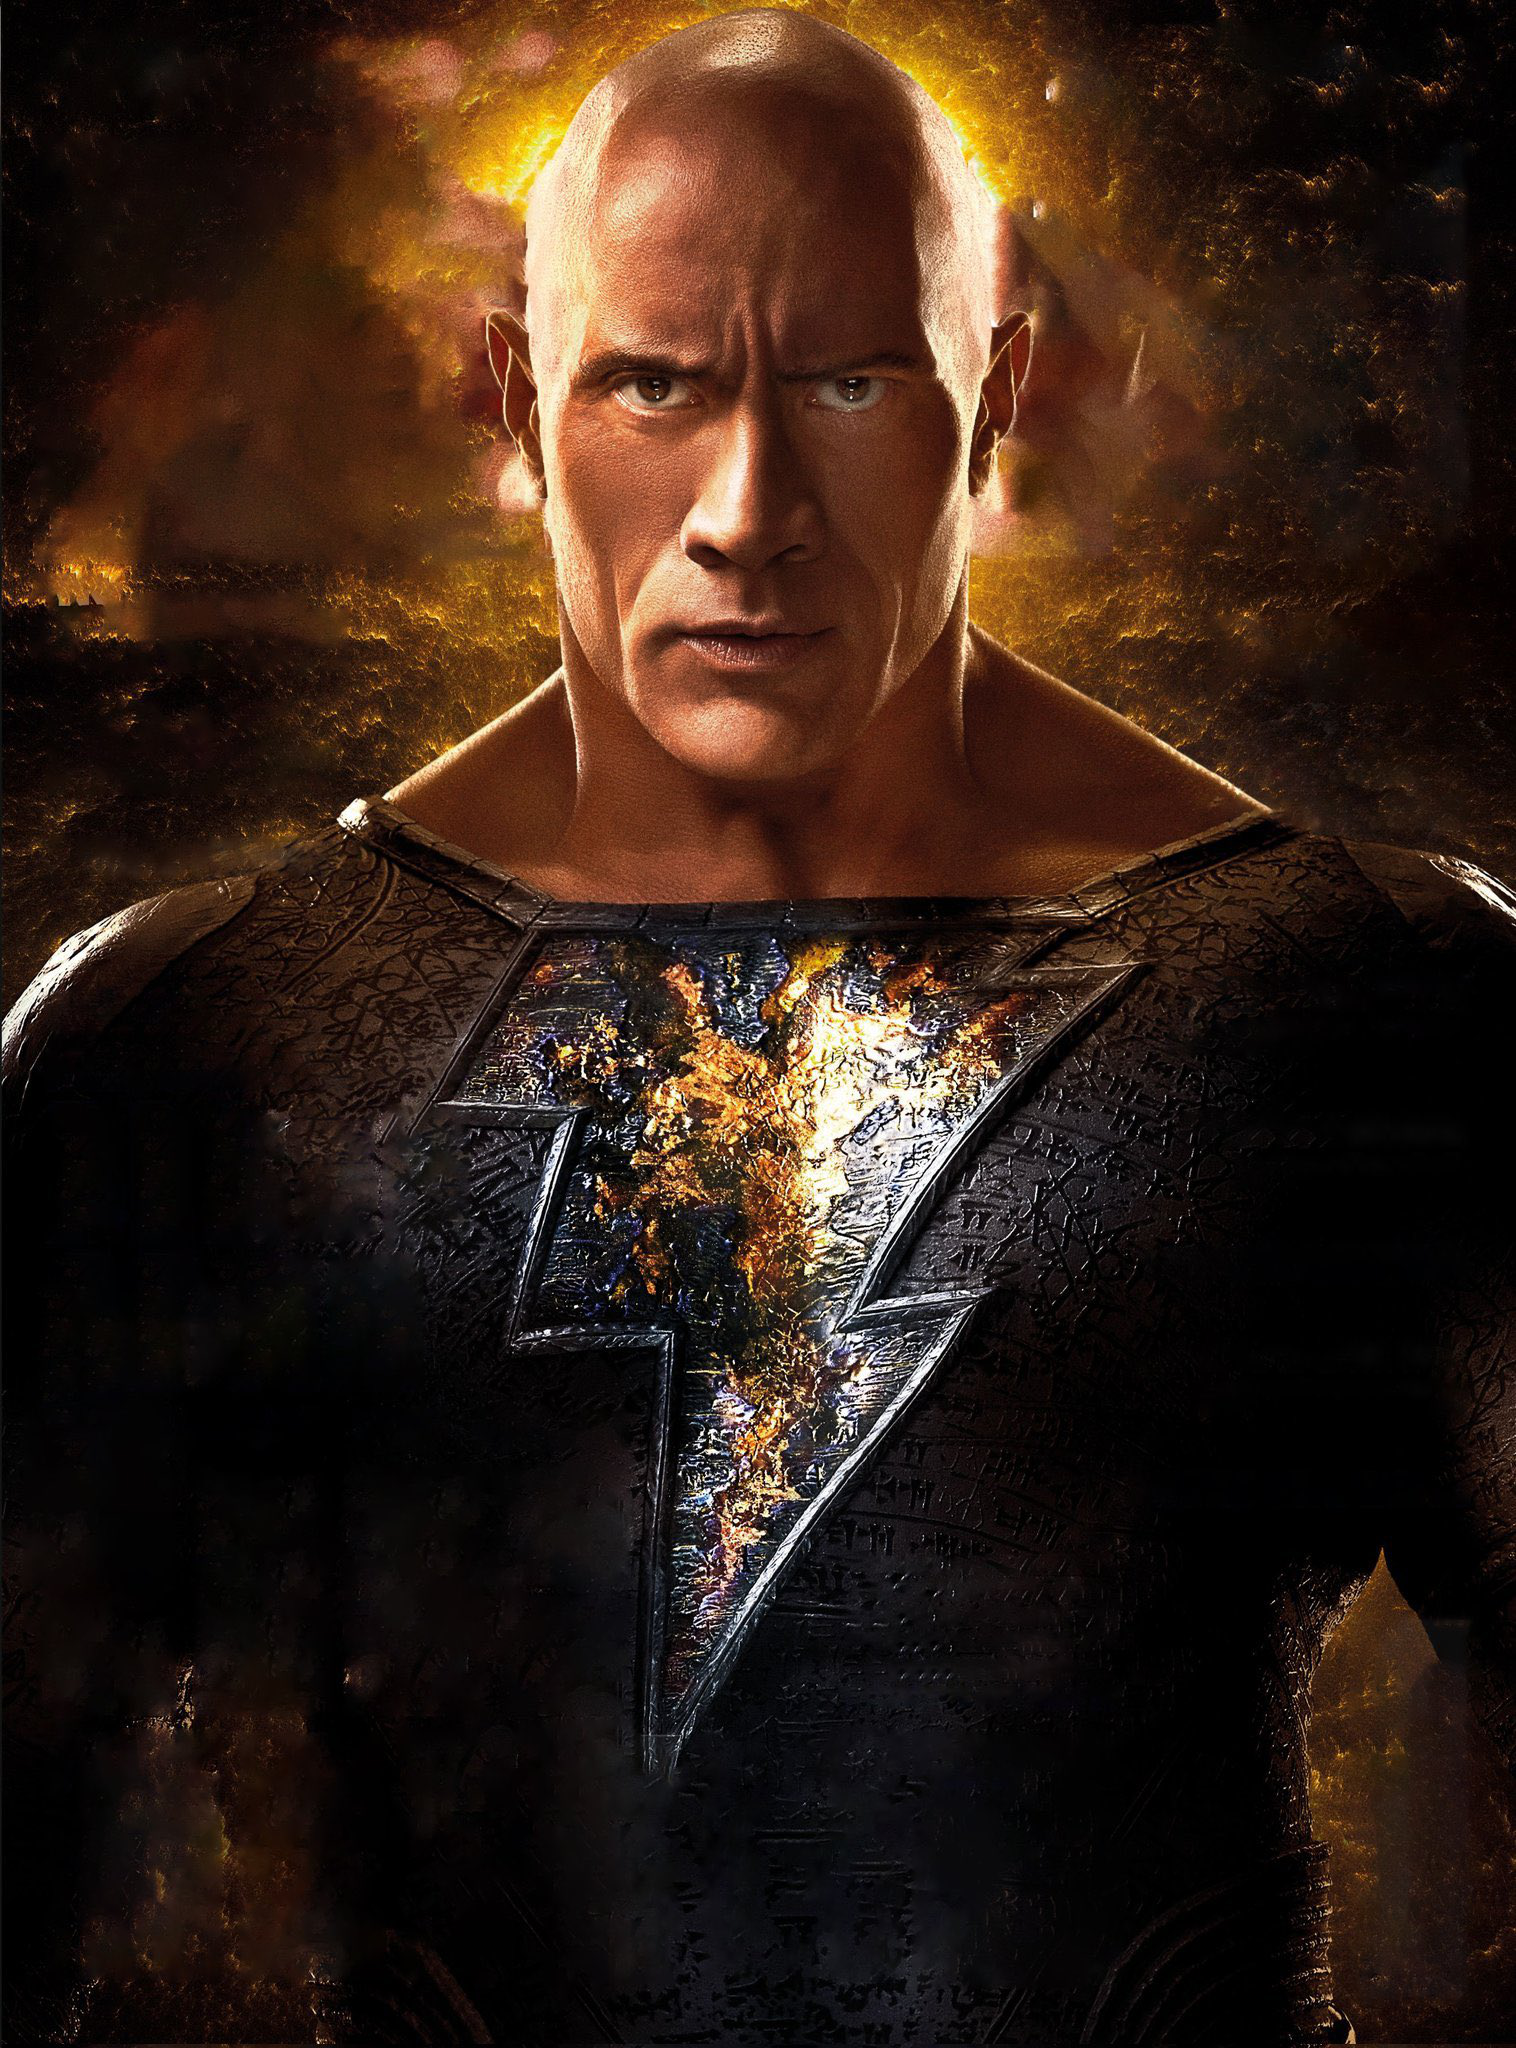 Black Adam 2' Not Happening at DC, Says The Rock - CNET